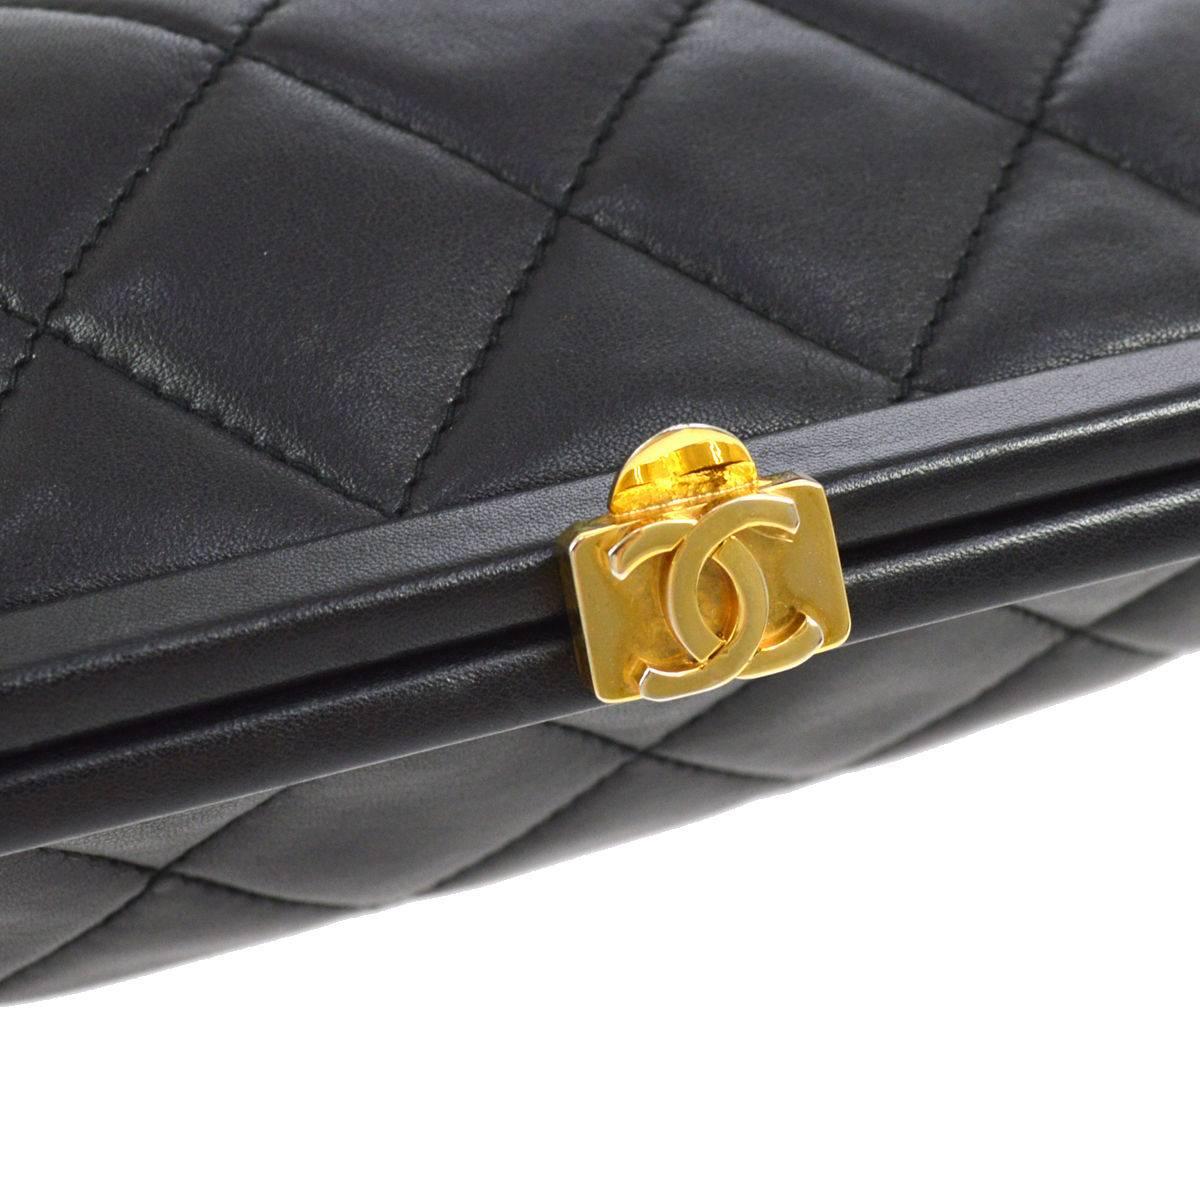 CURATOR'S NOTES

Chanel Black Quilted Lambskin Gold Charm Kisslock Evening Pouch Clutch Bag  

Lambskin leather
Gold tone hardware
Leather lining
Kisslock closure
Made in Italy
Date code 0275307
Measures 7.5" W x 5.5" H x 1.5" D